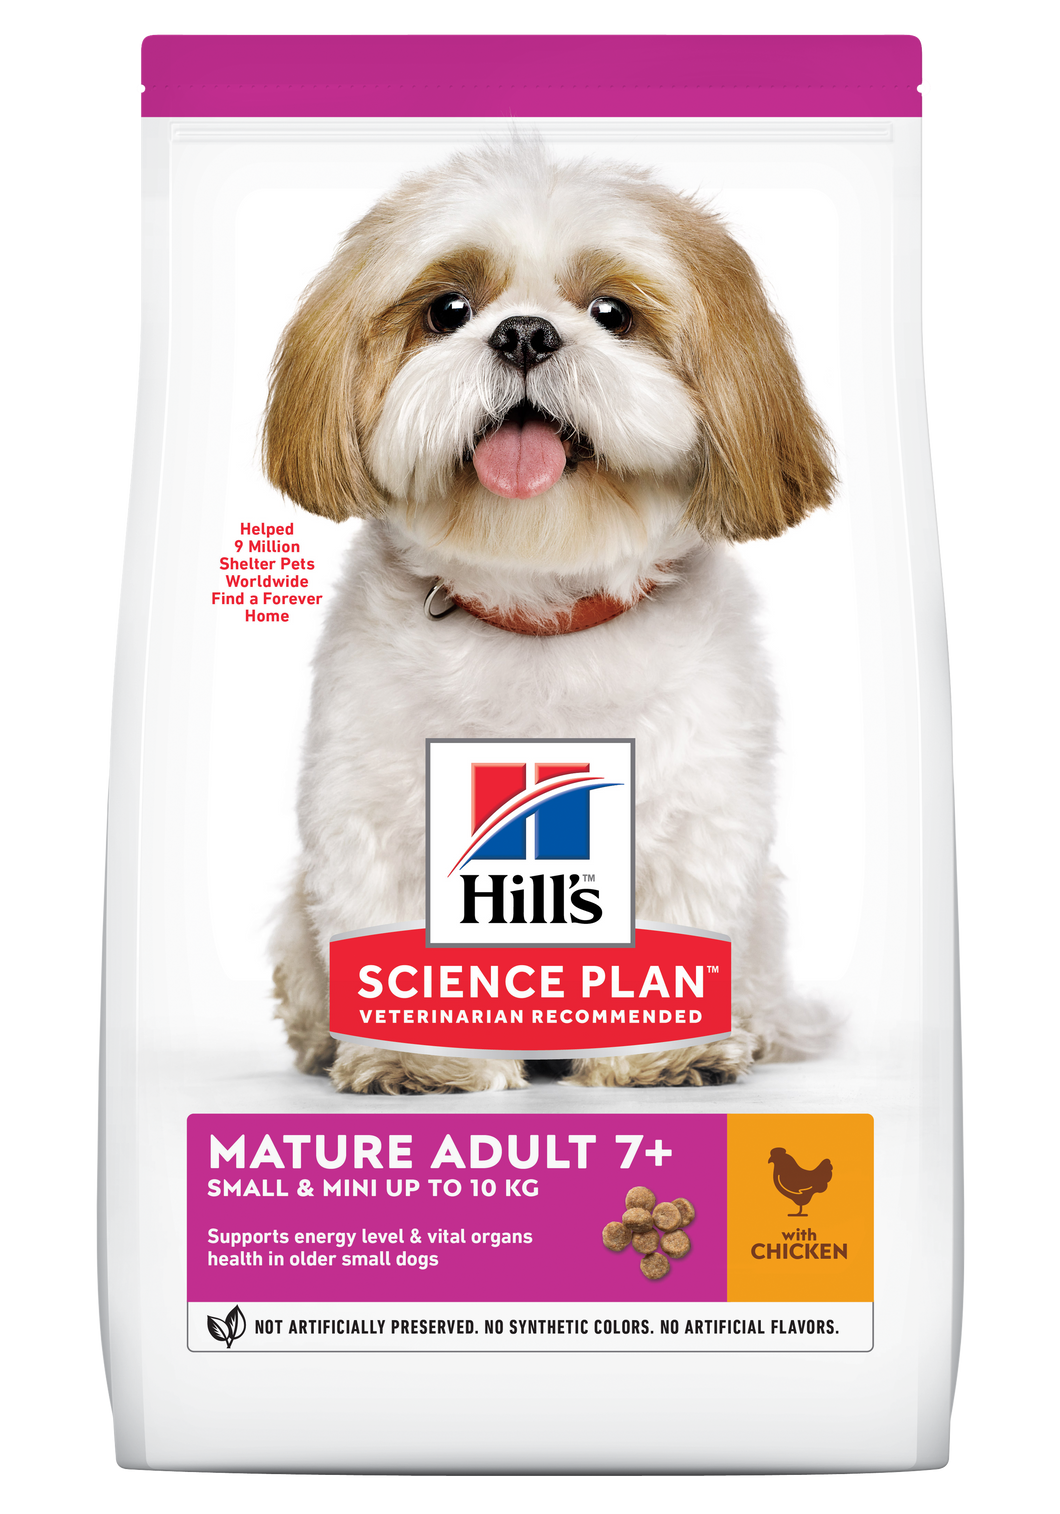 HILL'S SCIENCE PLAN Mature Adult Small & Mini 7+ Dry Dog Food Chicken Flavour